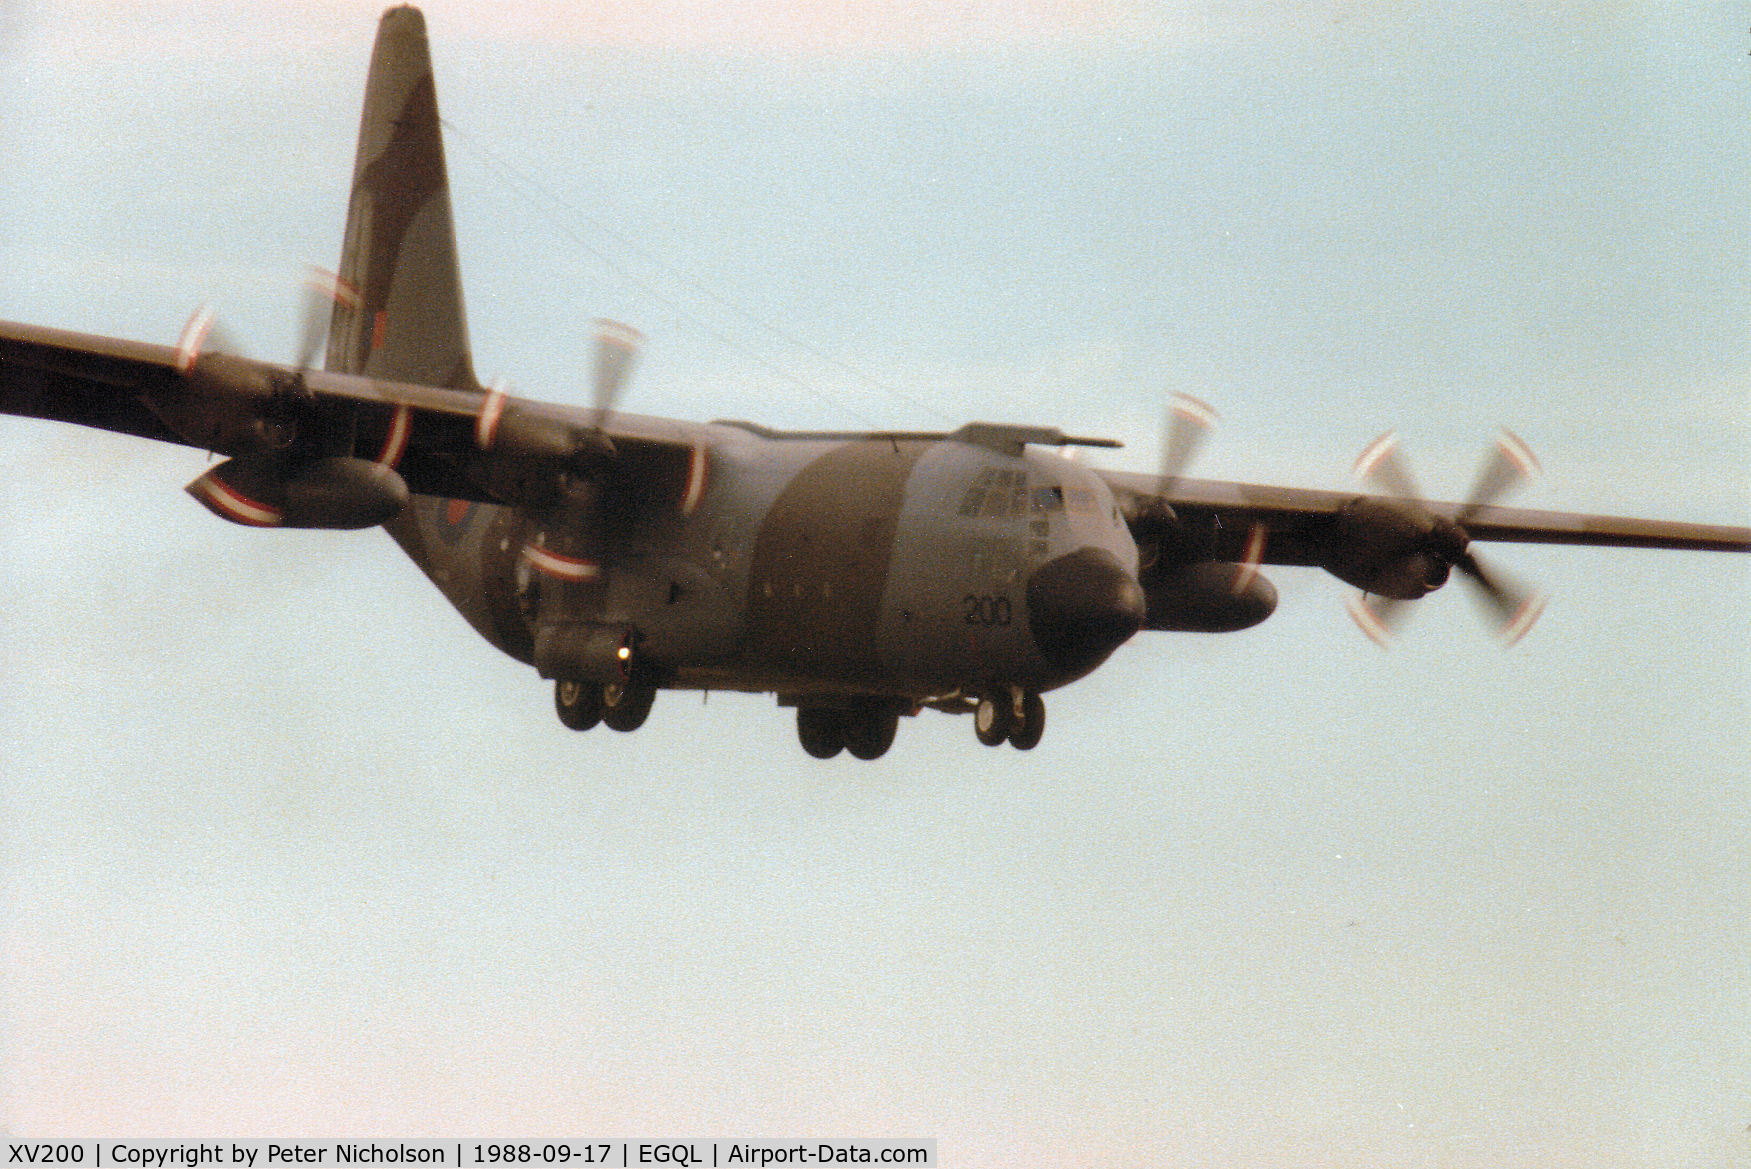 XV200, 1967 Lockheed C-130K Hercules C.1 C/N 382-4223, Another view of the 47 Squadron Hercules C.1 in action at the 1988 RAF Leuchars Airshow.